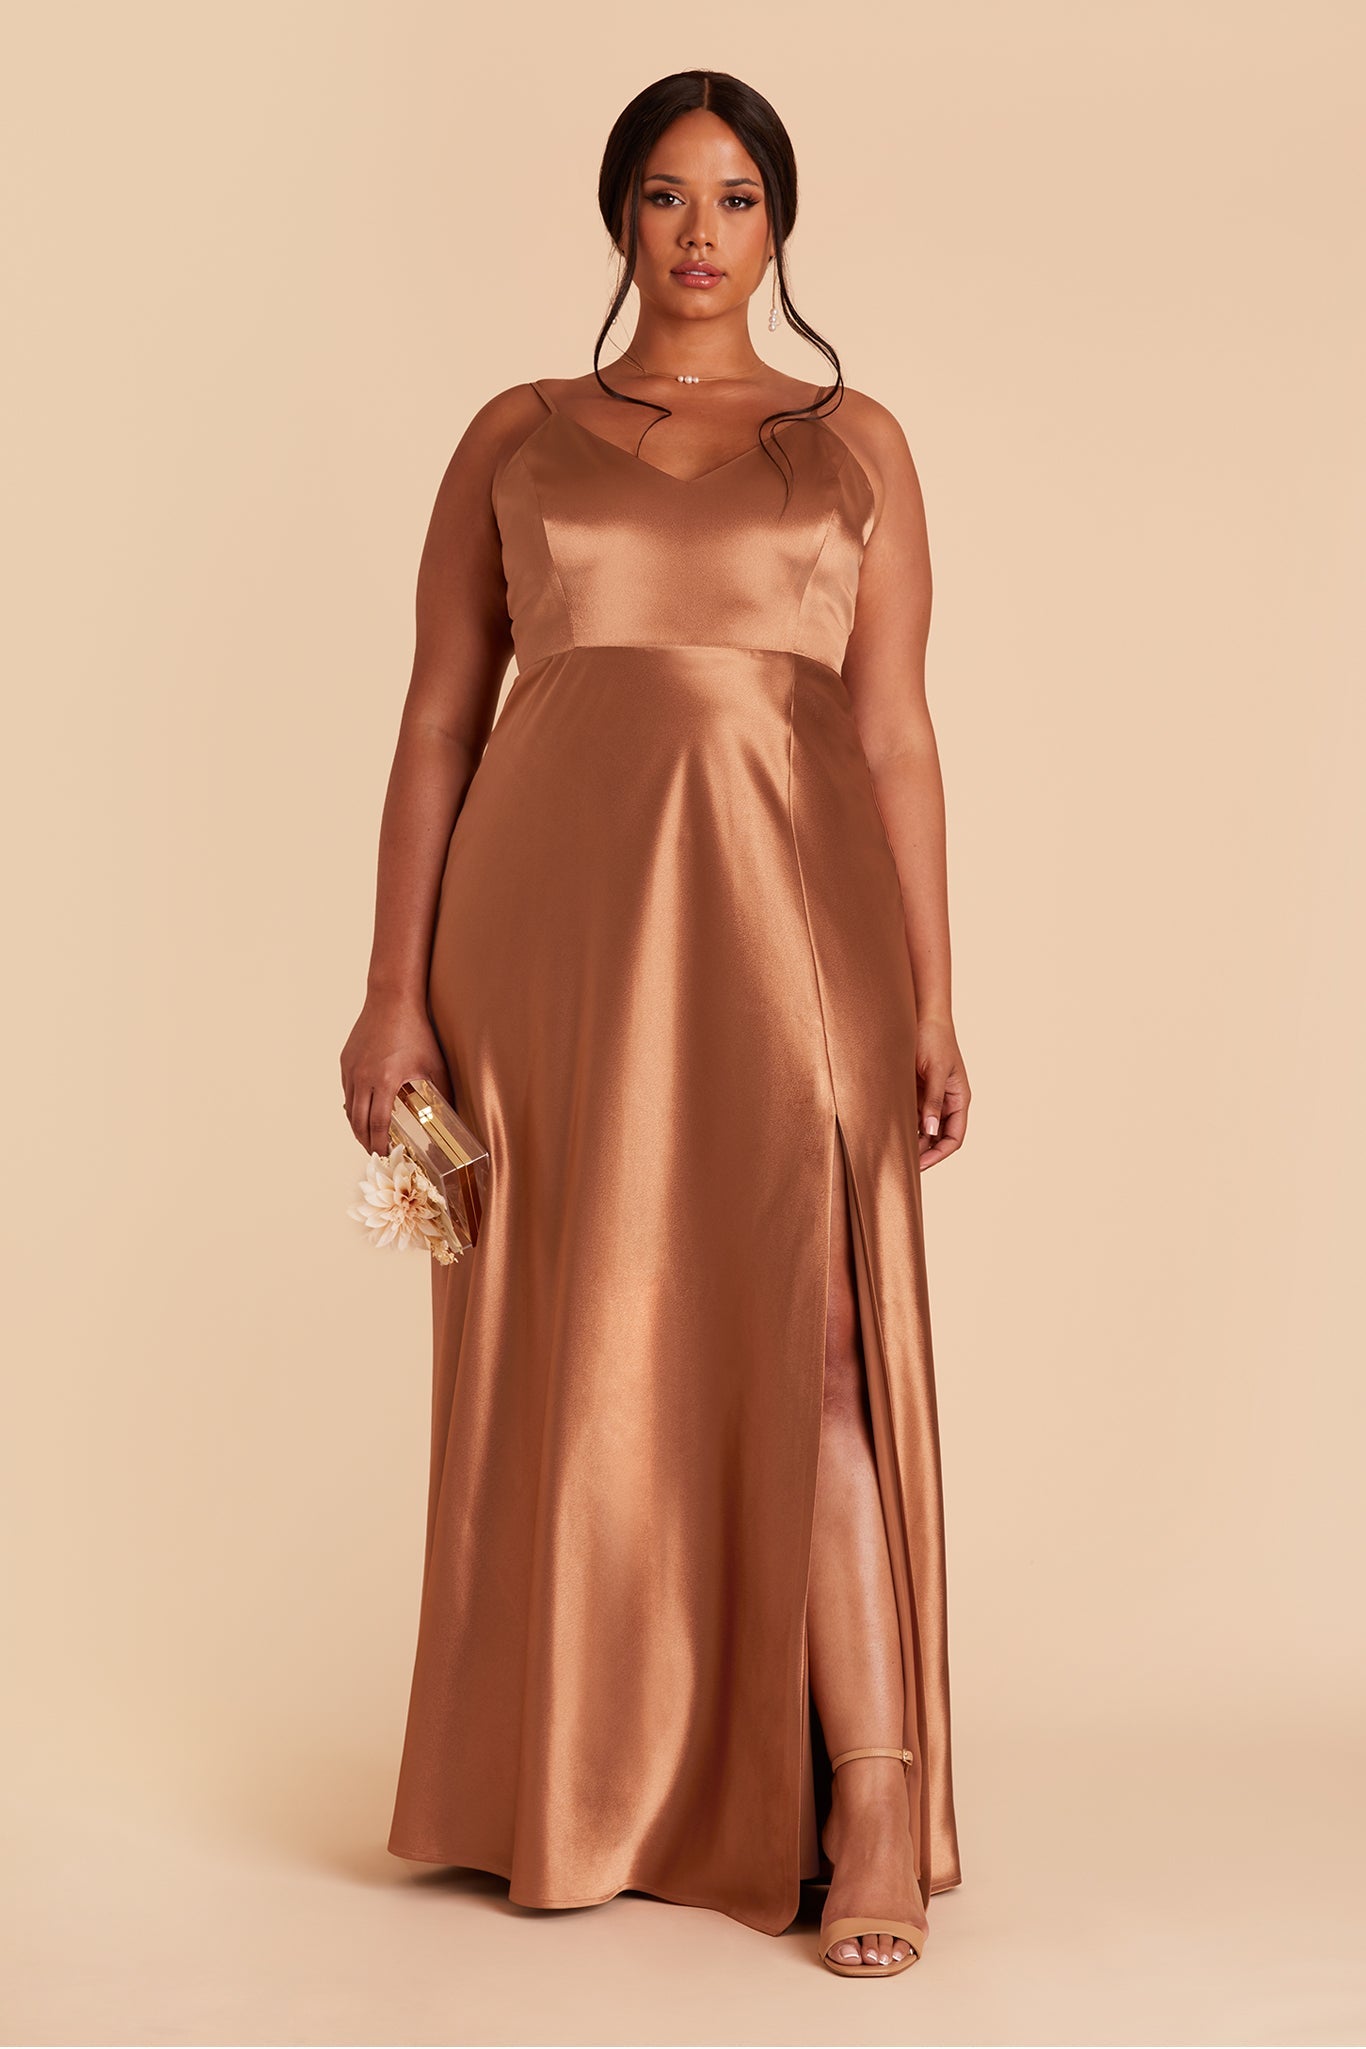 Jay plus size bridesmaid dress with slit in rust satin by Birdy Grey, front view